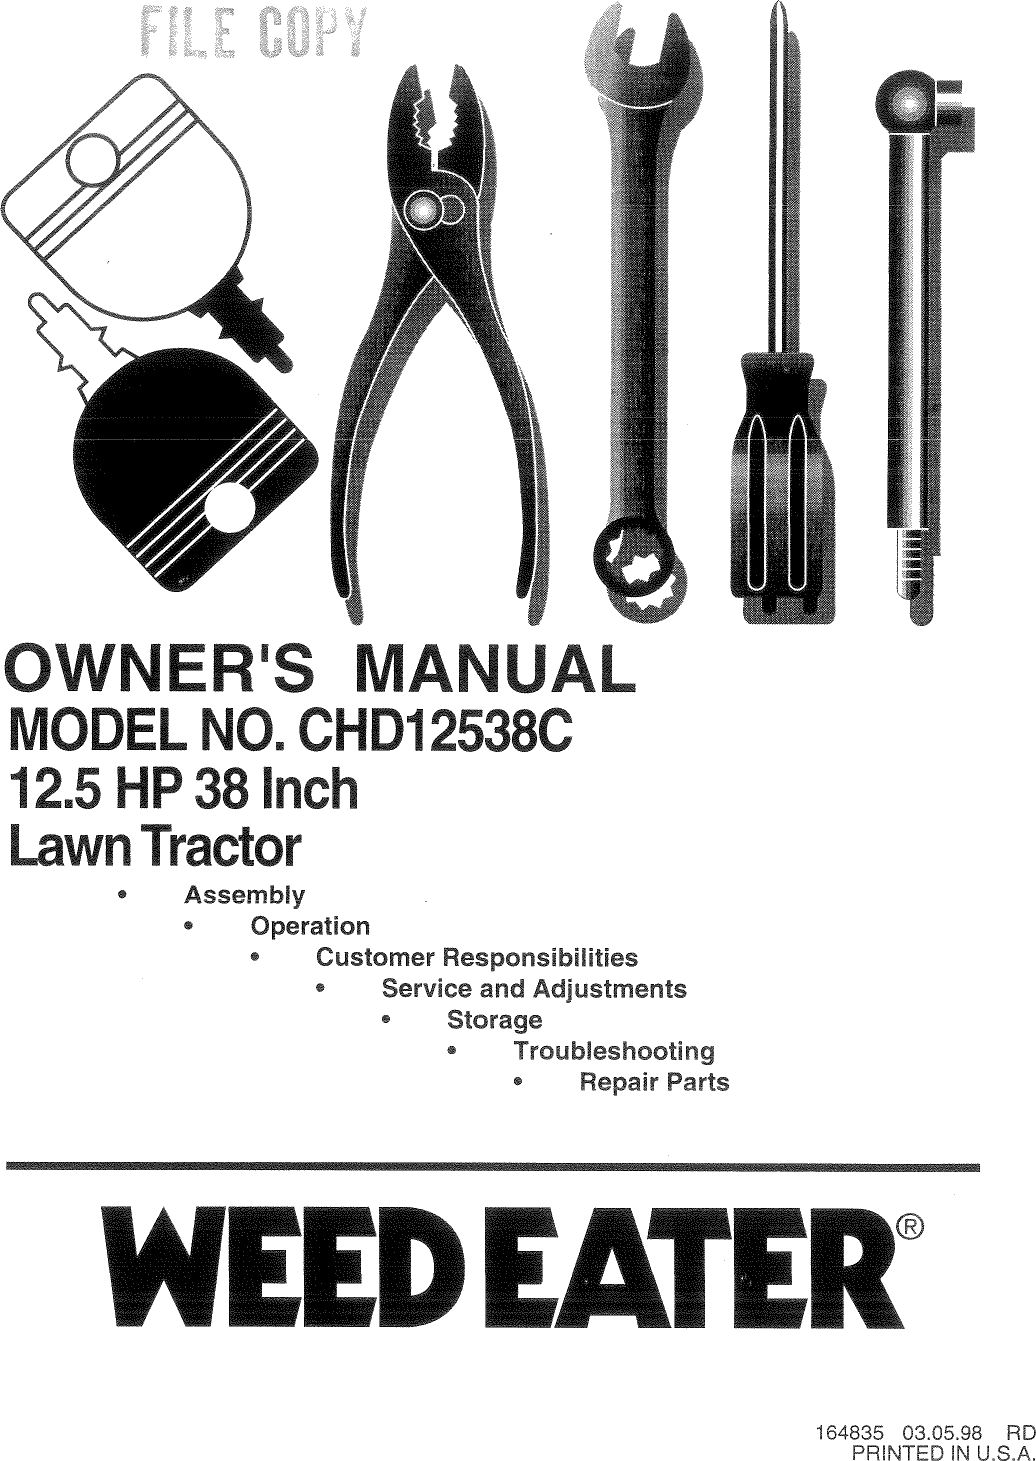 WeedEater164835OwnersManual204521.597912180-User-Guide-Page-1.png